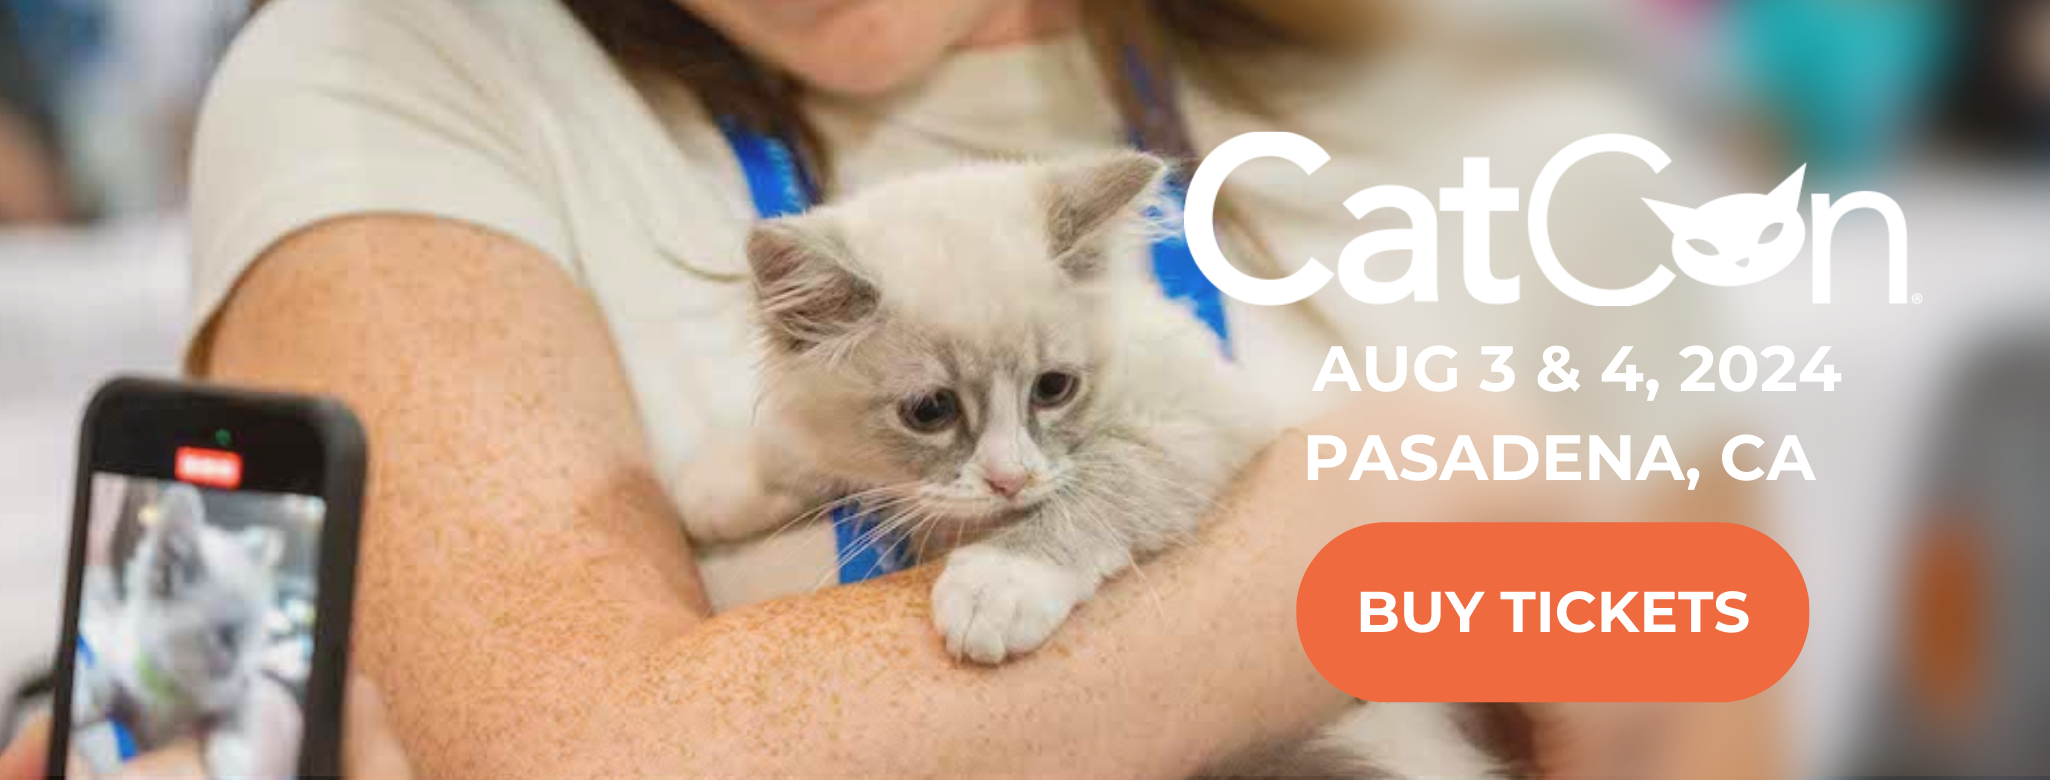 Woman holding a kitten at CatCon. BUY CATCON 2024 TICKETS NOW!